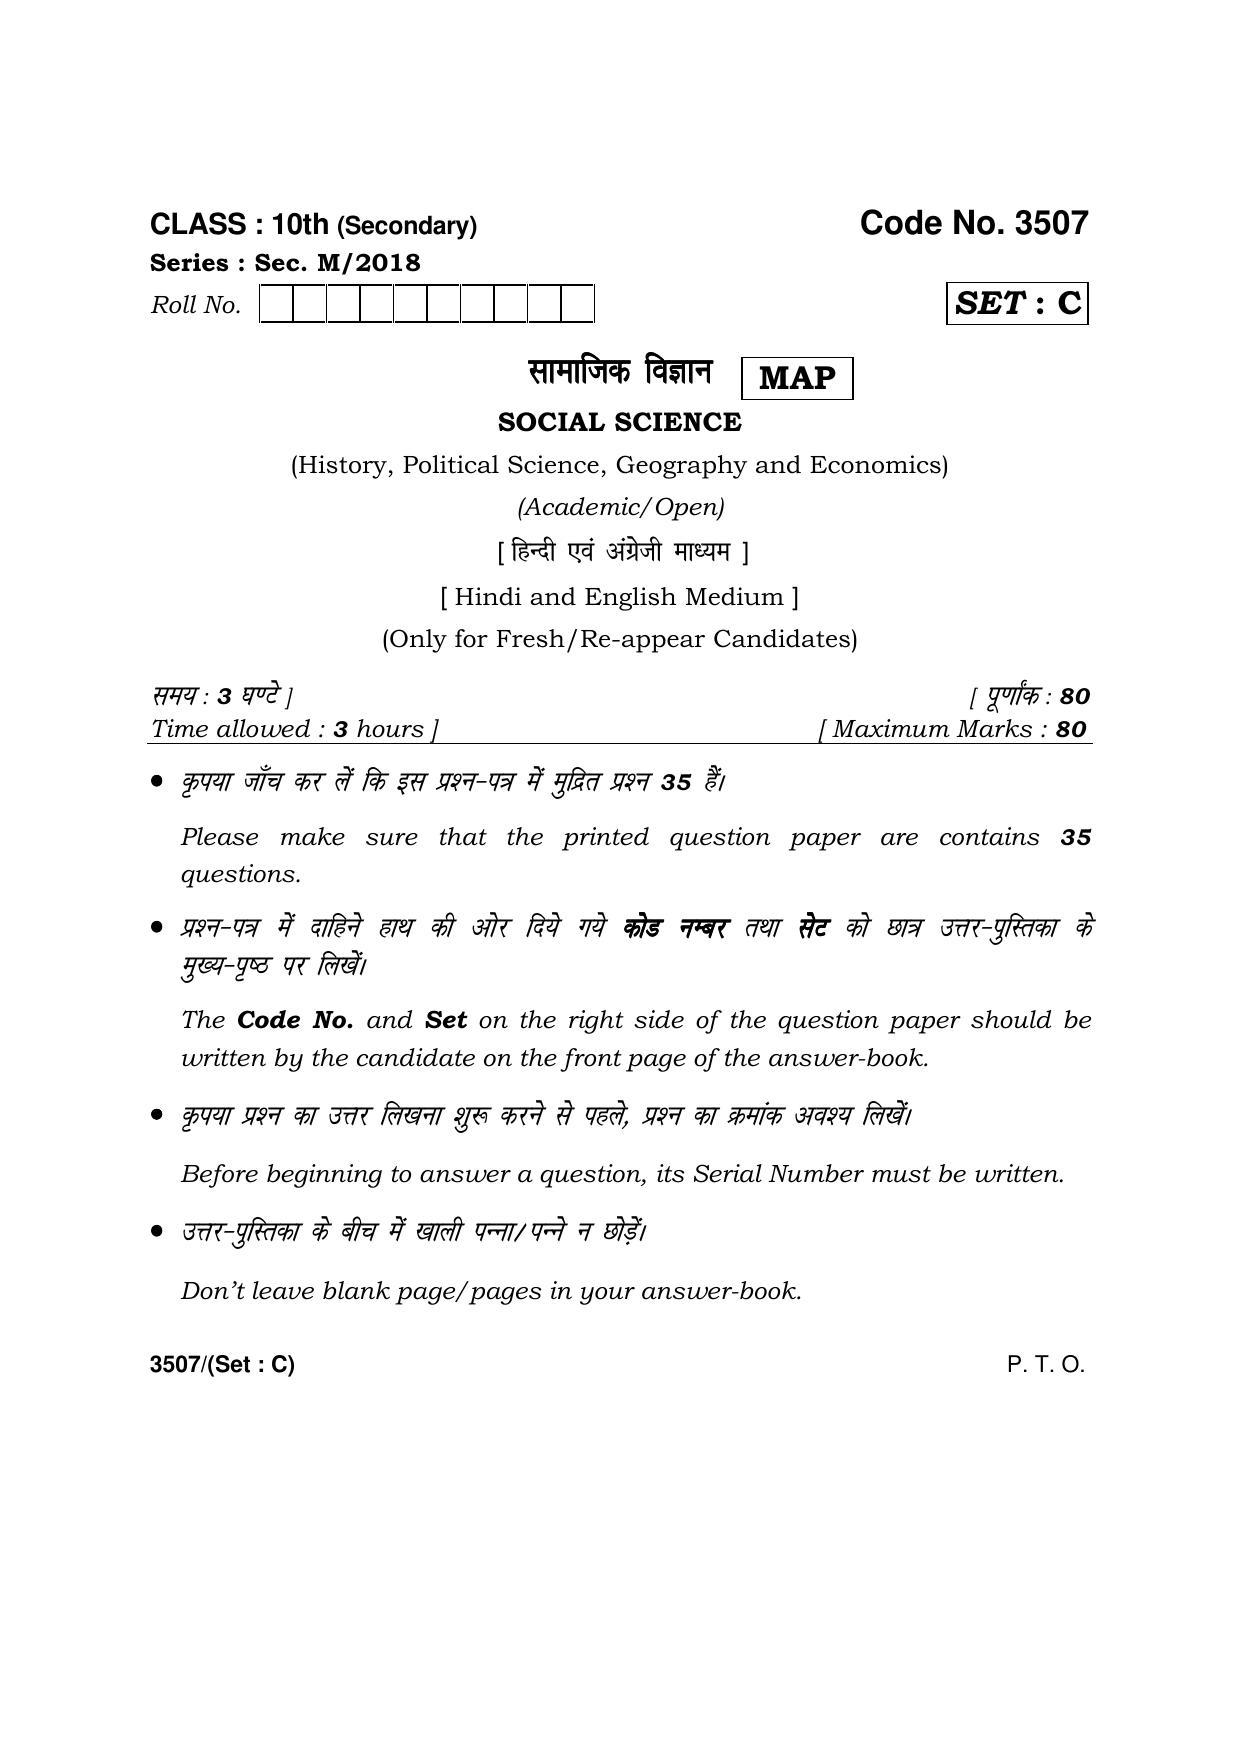  Haryana Board HBSE Class 10 Social Science -C 2018 Question Paper - Page 1